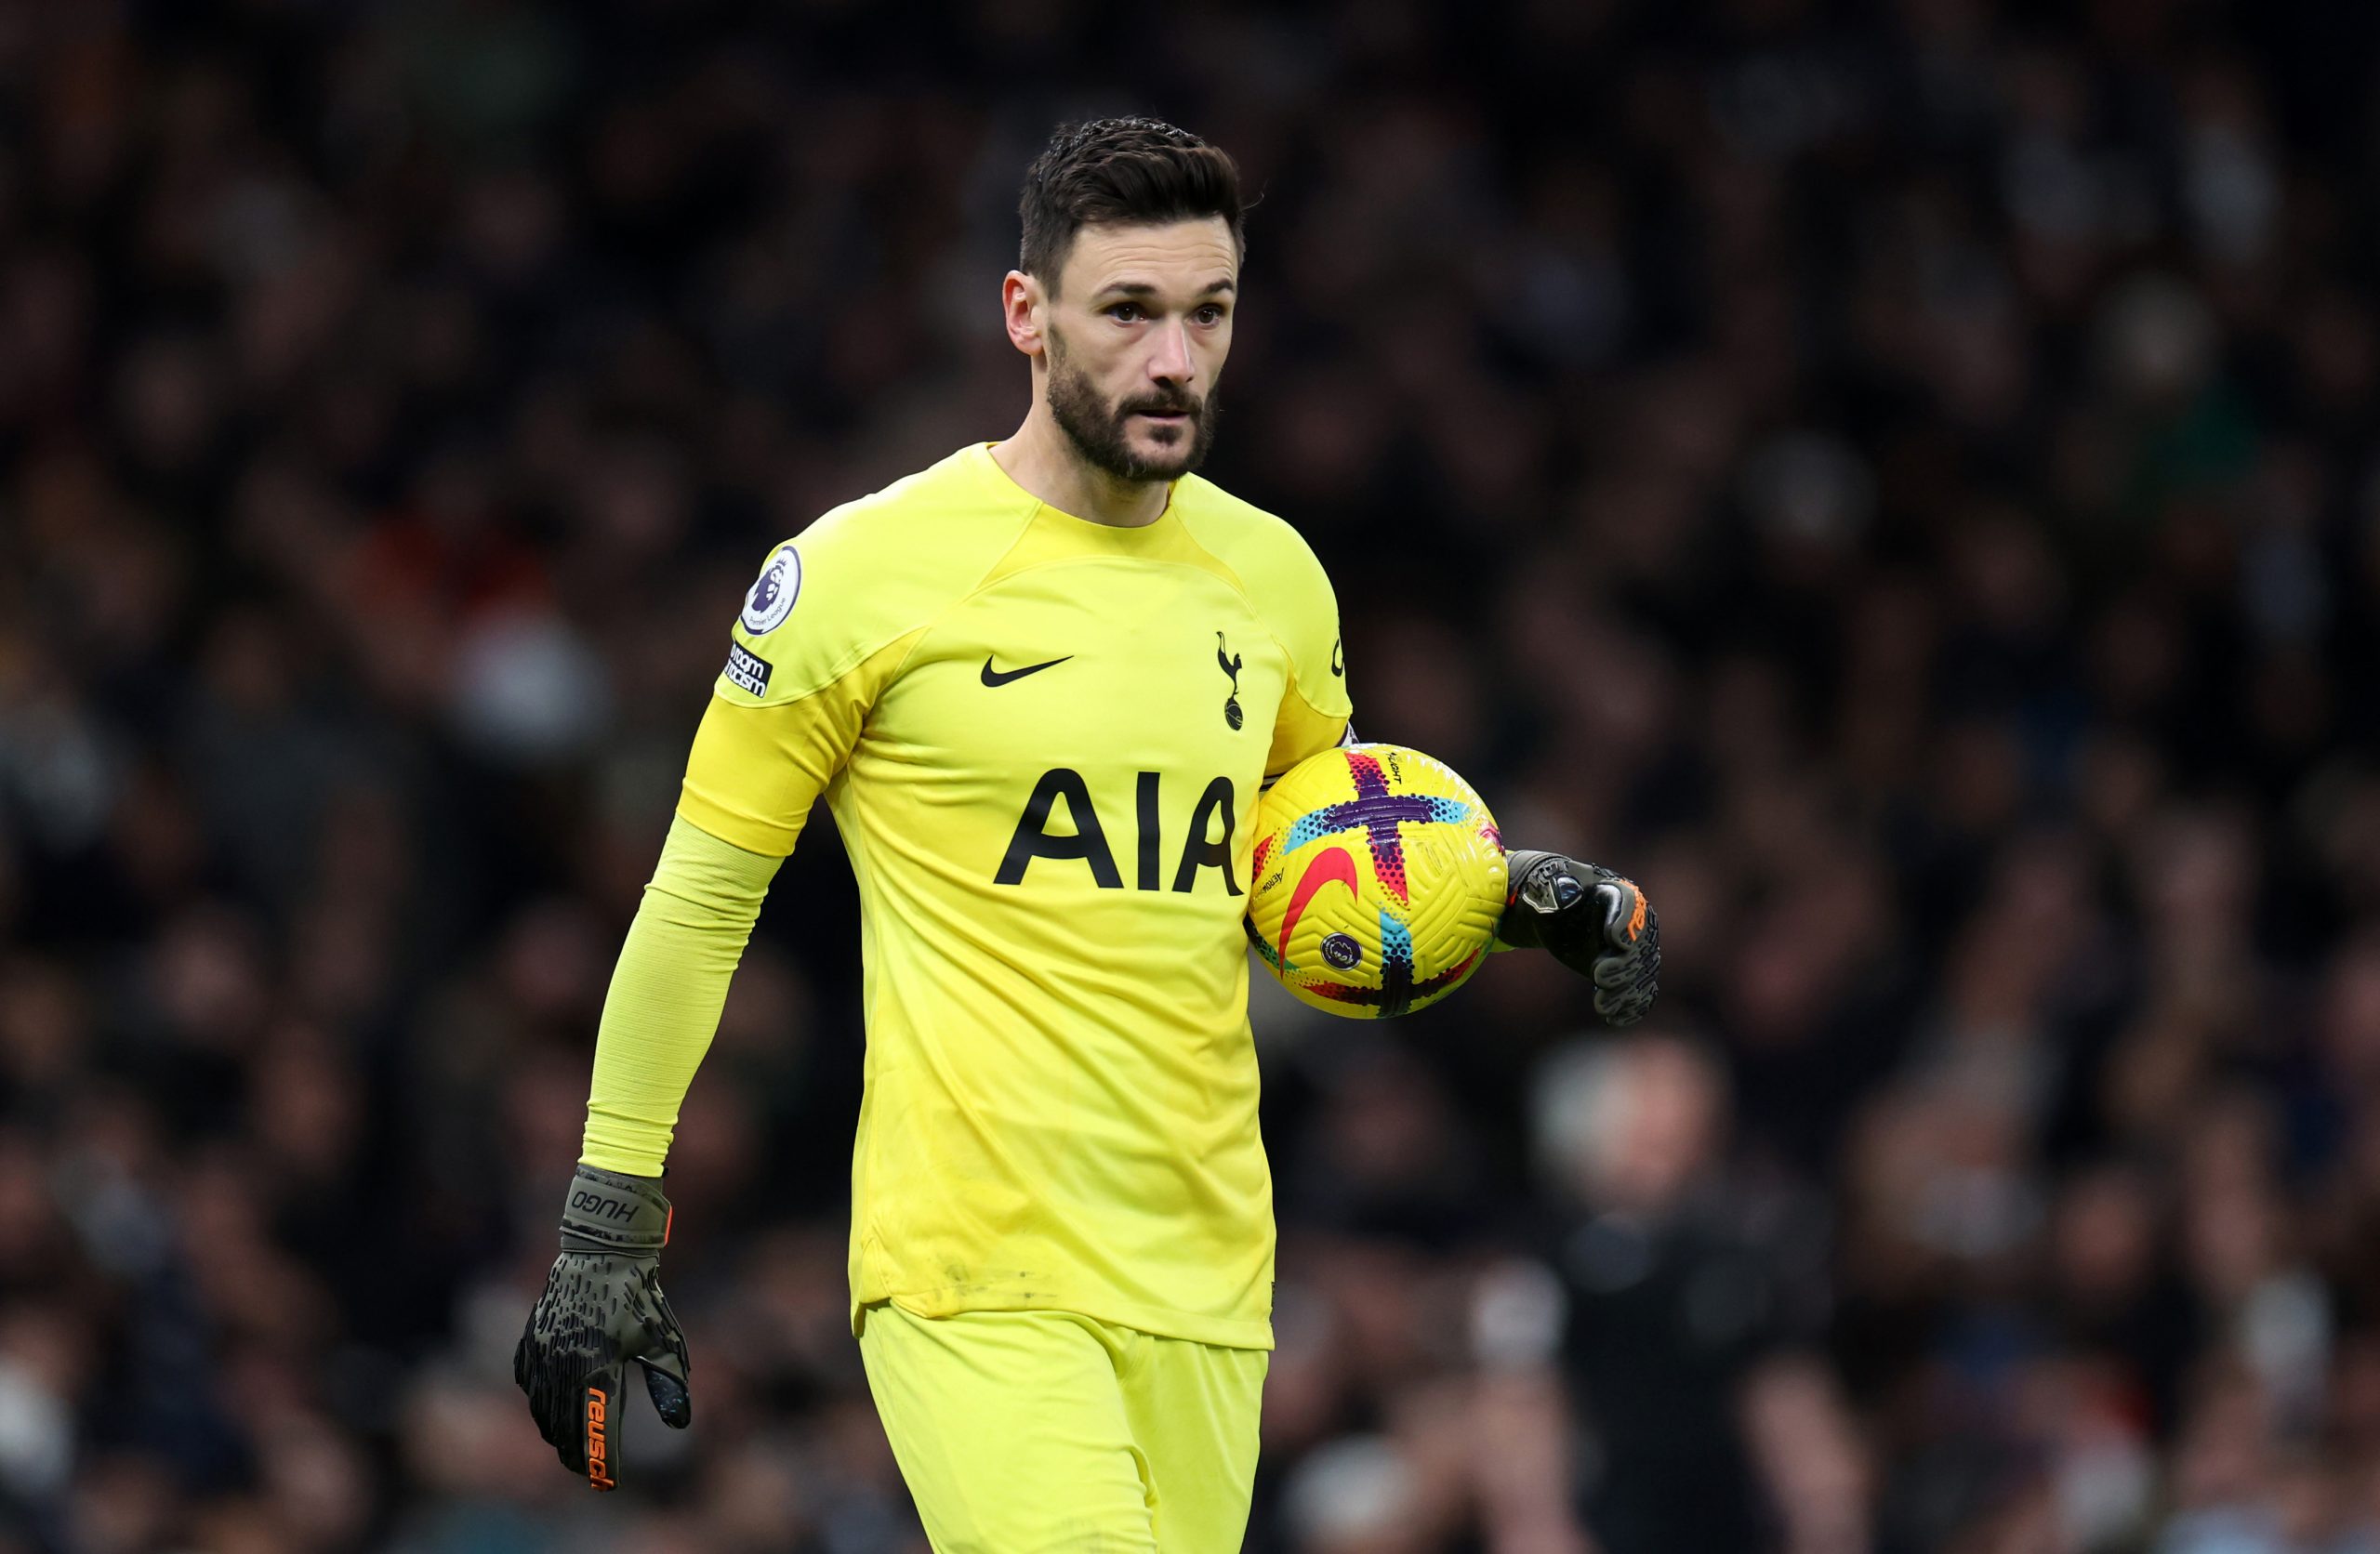 Hugo Lloris reflects on the legacy left by him at Tottenham Hotspur.